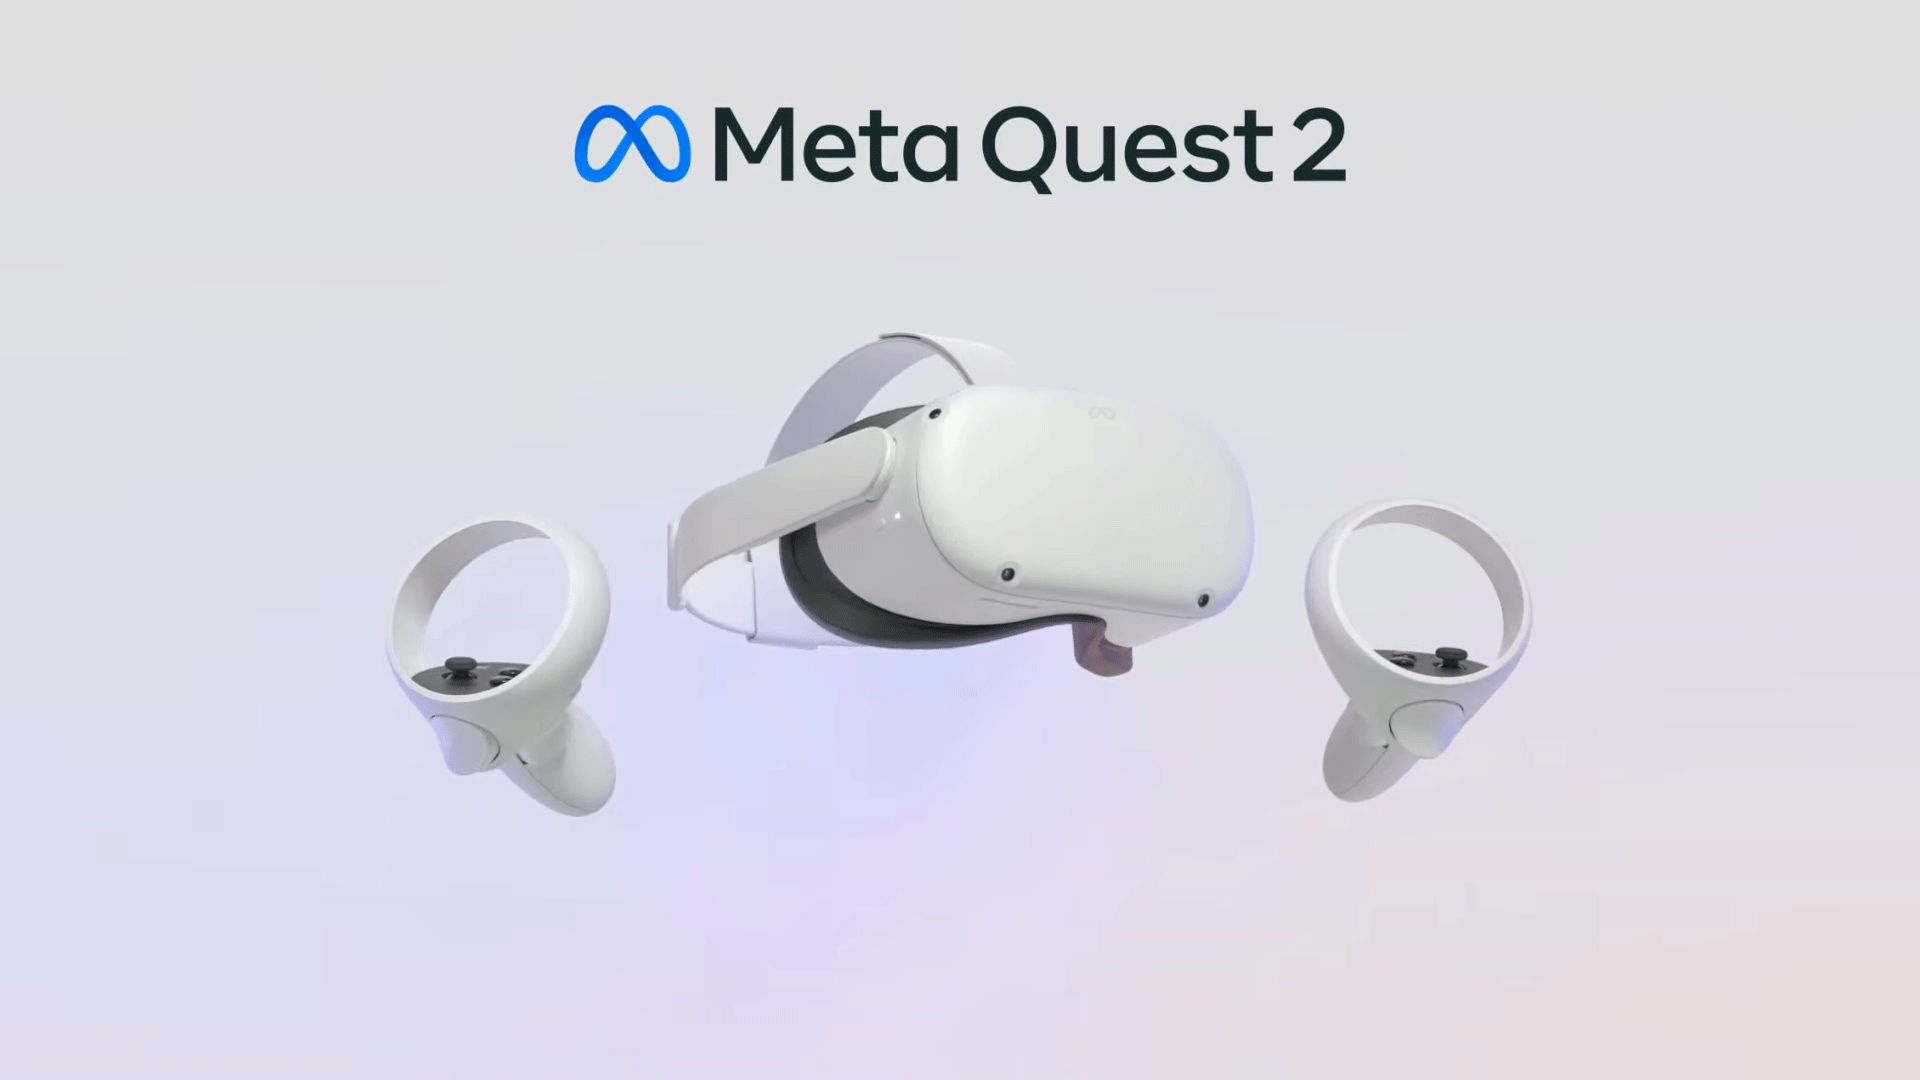 Meta Raises Quest 2 Price to Stave off Growing Costs